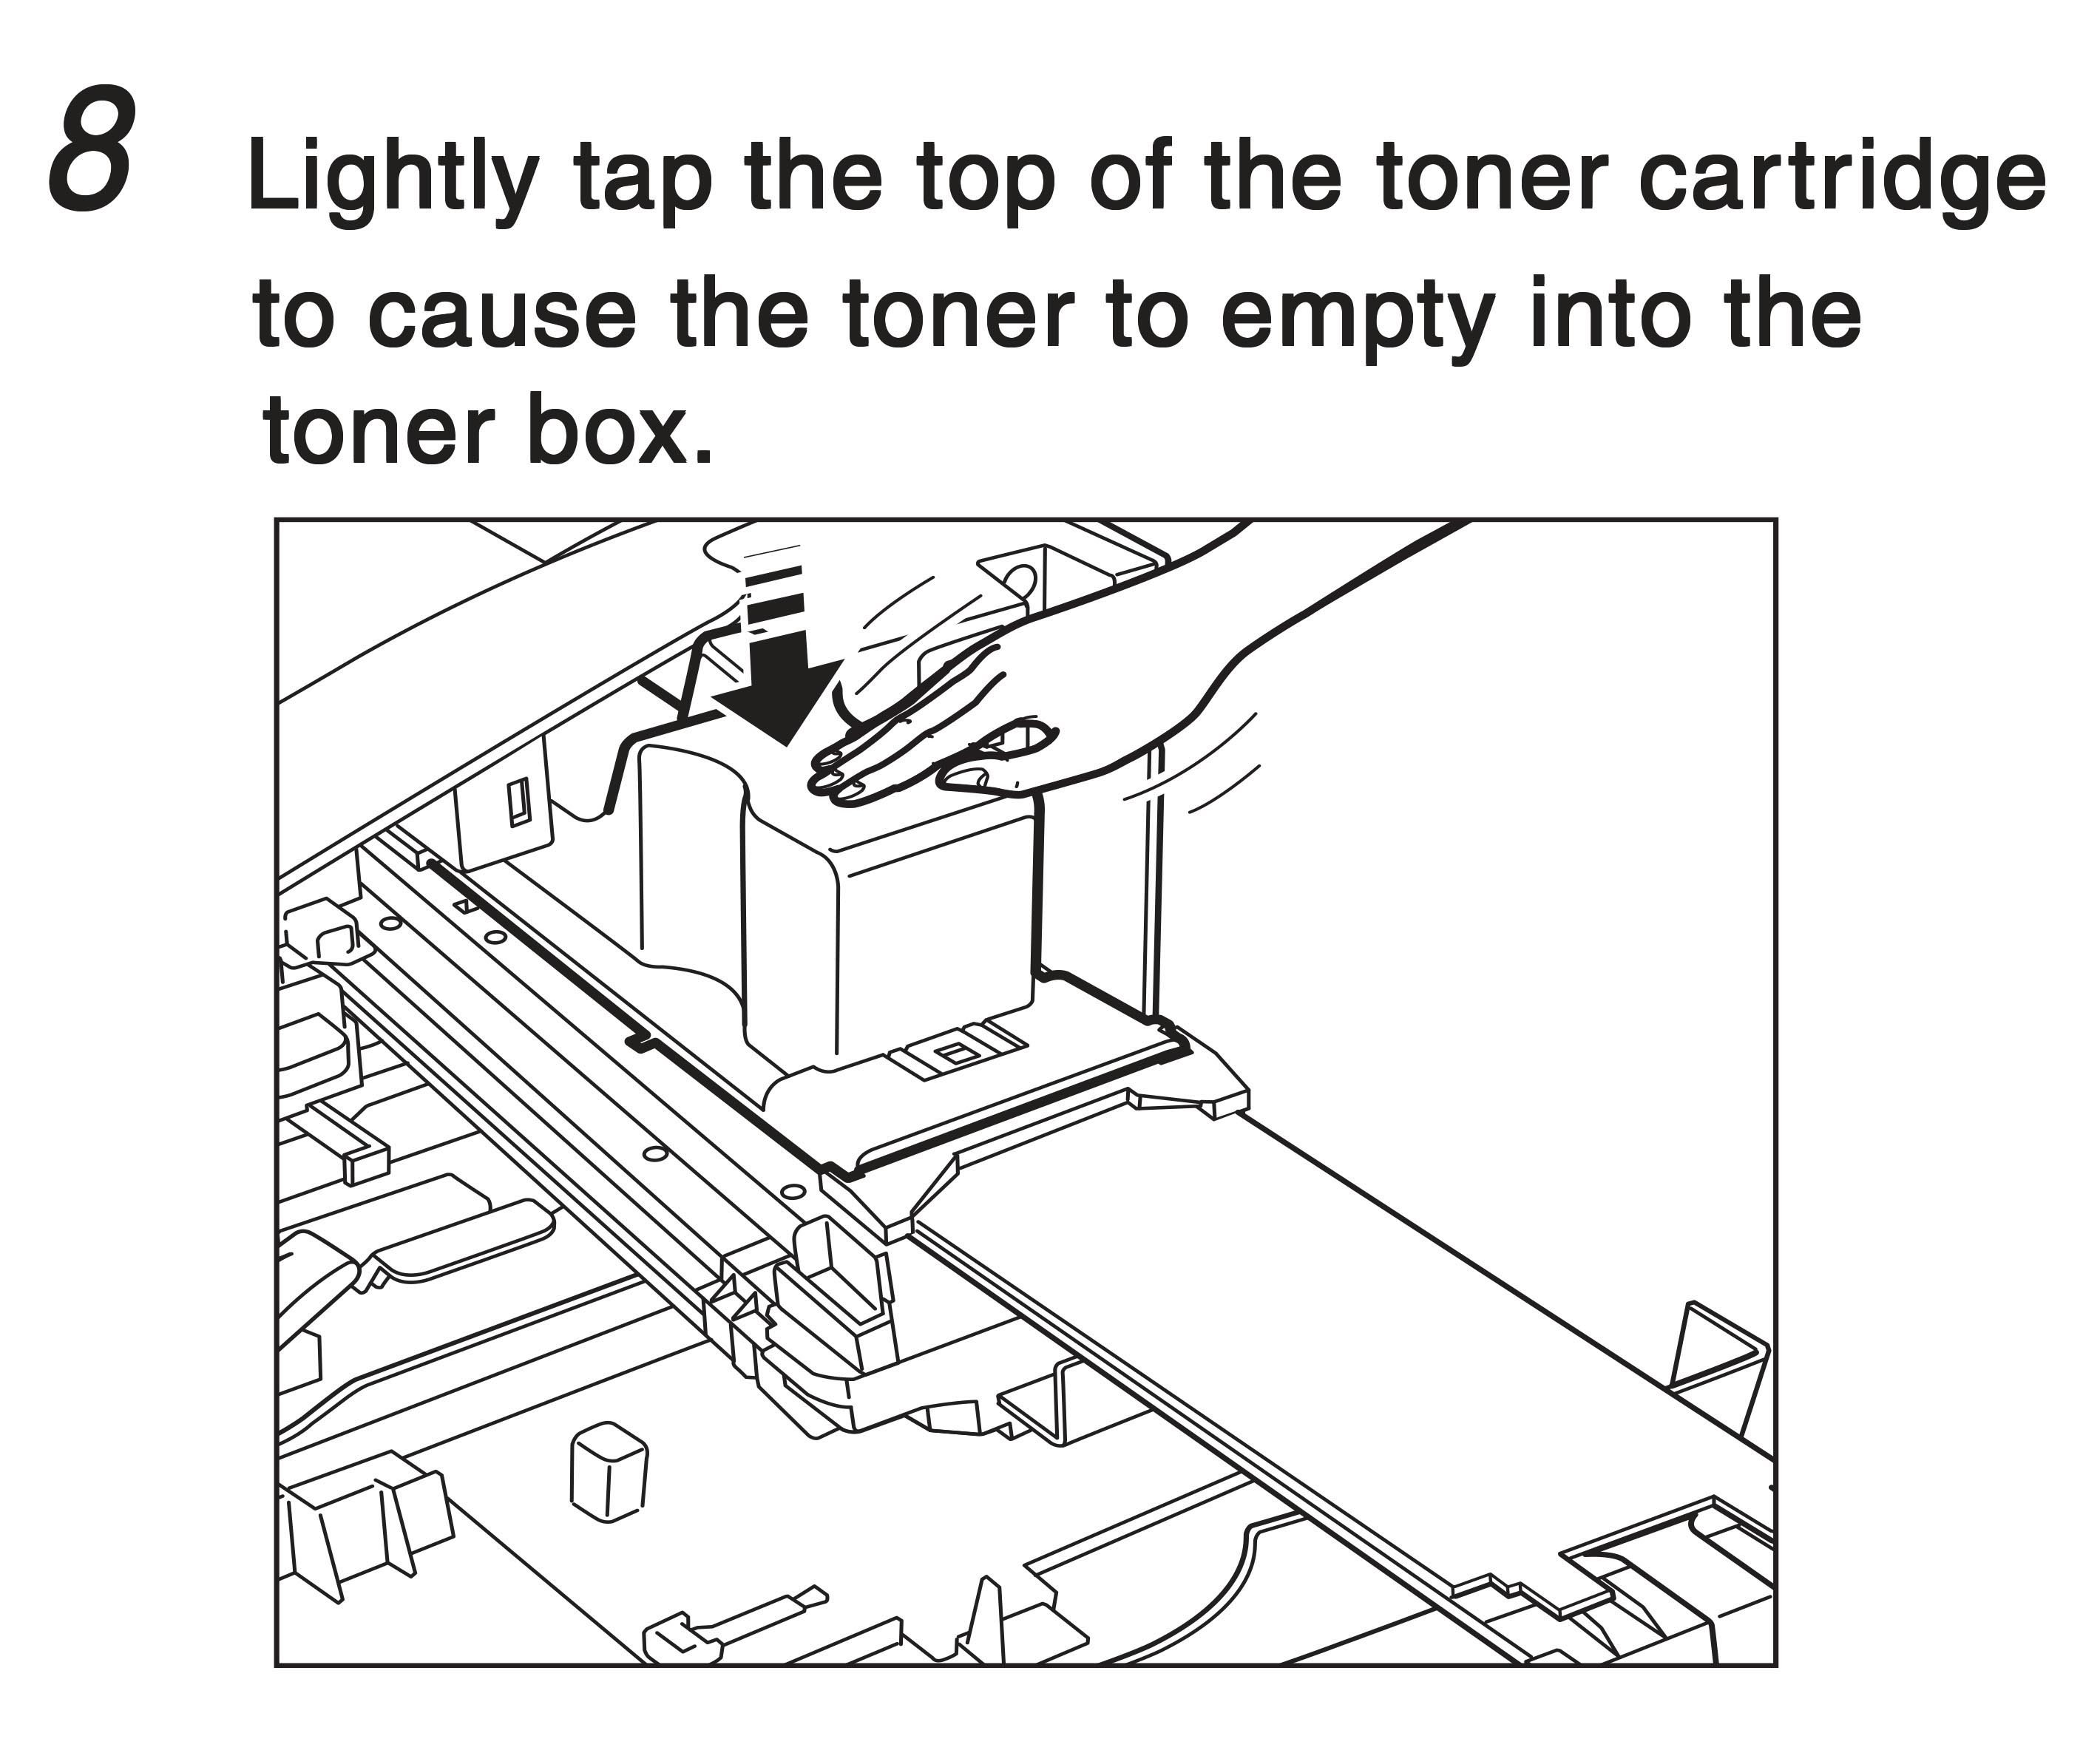 8. Lightly tap the top of the toner cartridge to cause the toner to empty into the toner box. 